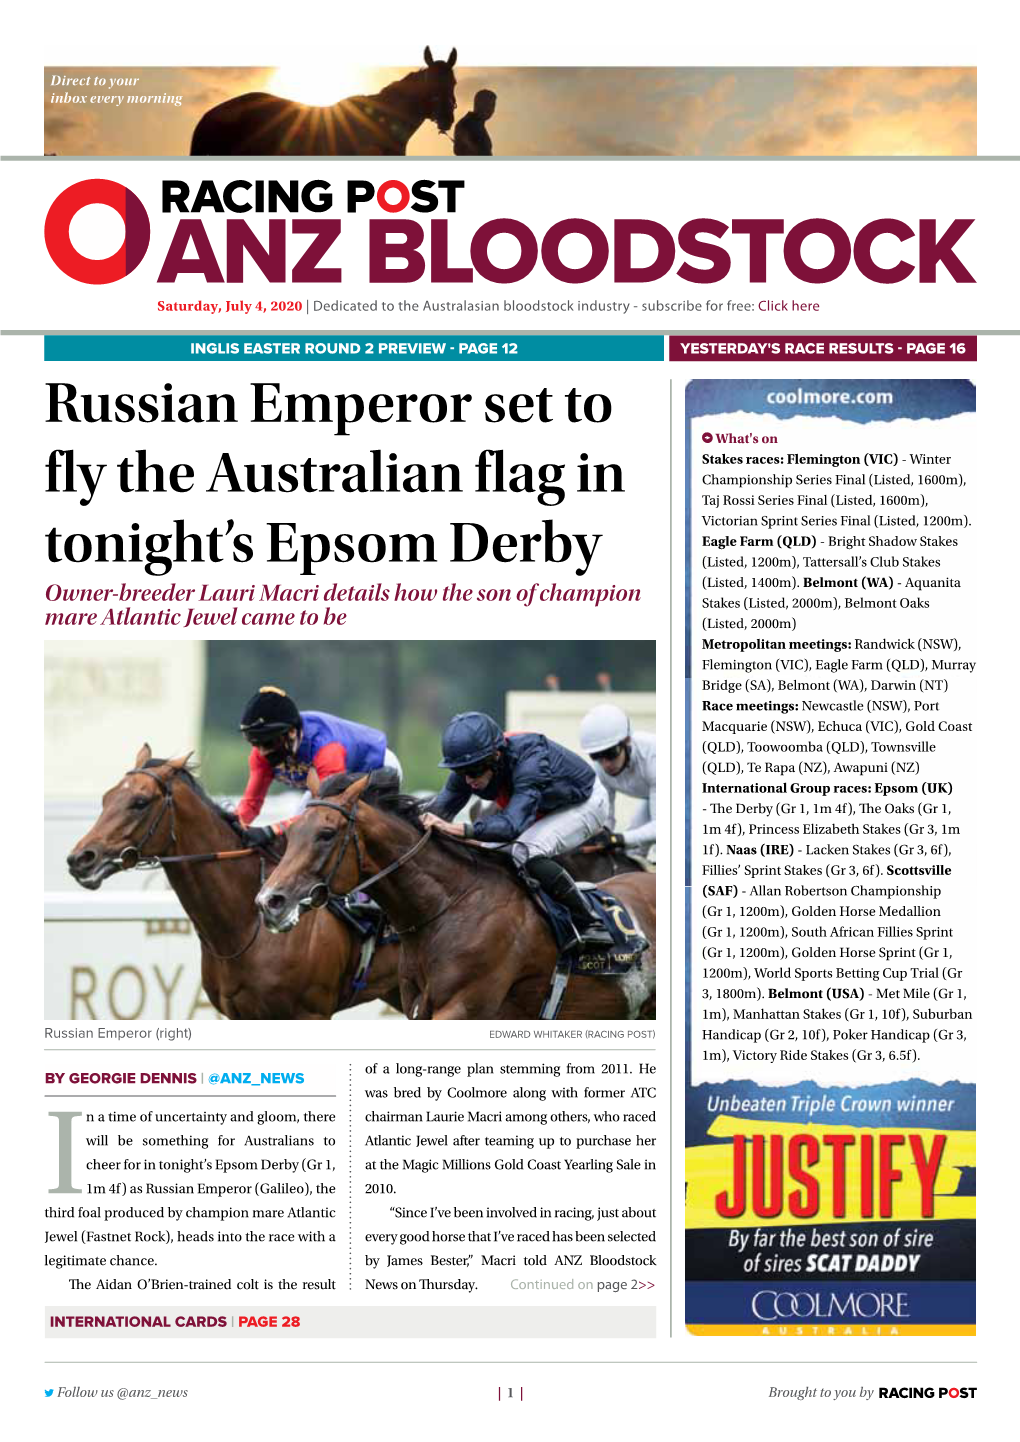 Russian Emperor Set to Fly the Australian Flag in Tonight's Epsom